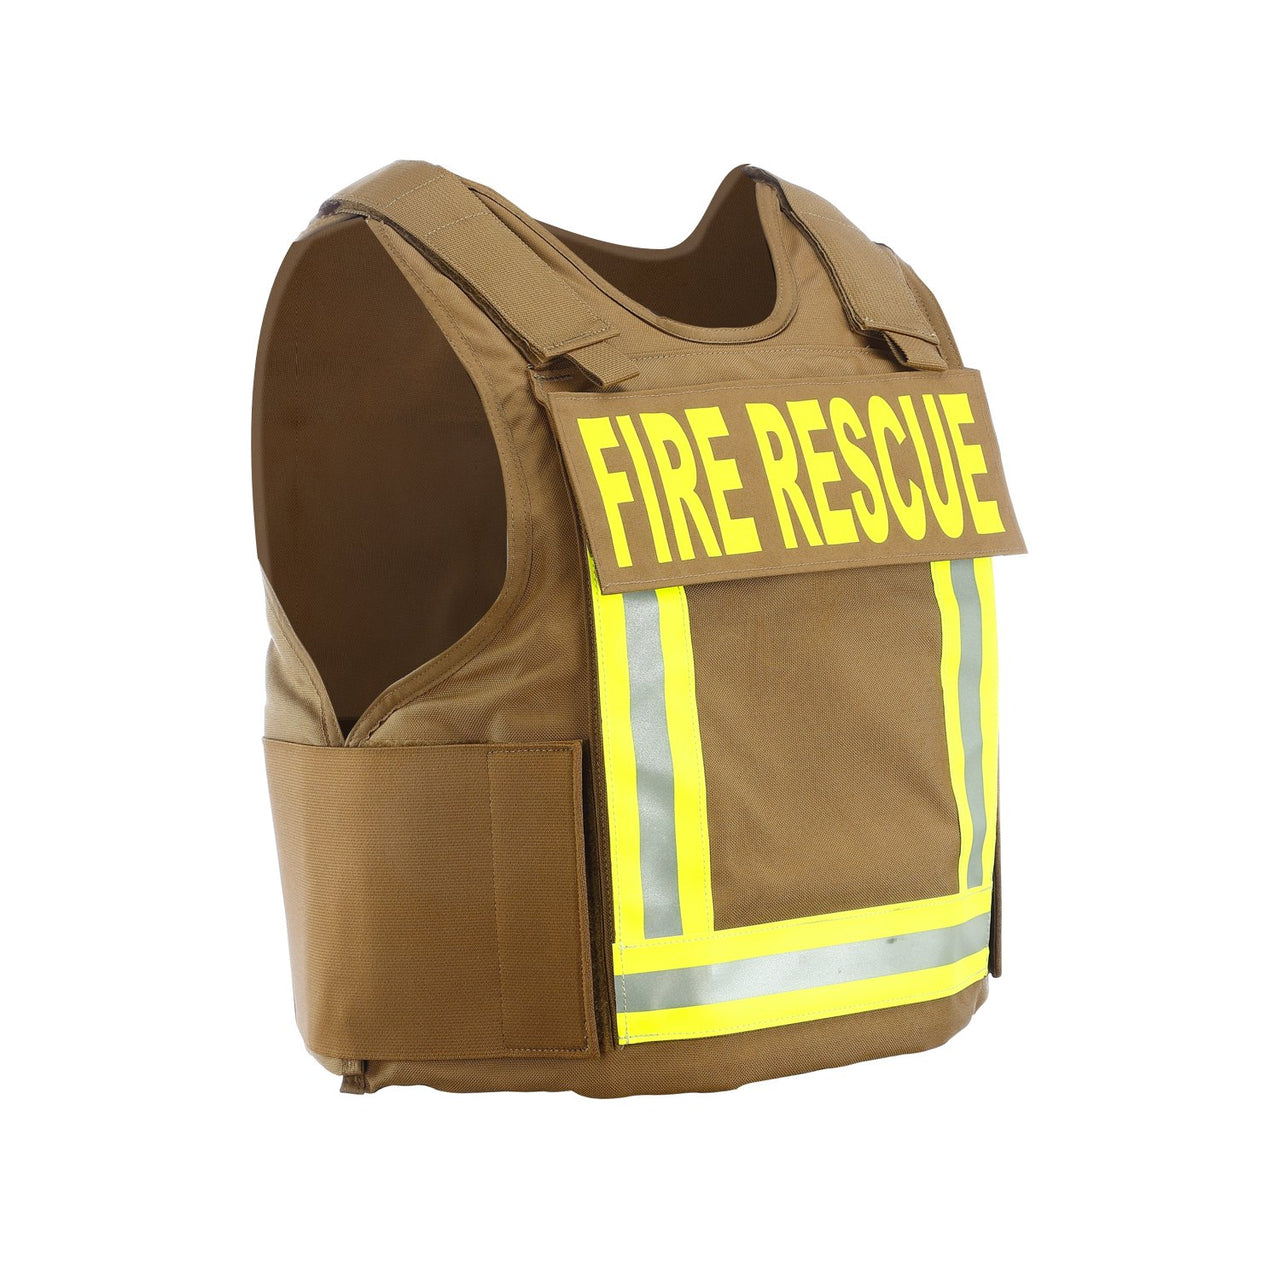 A Body Armor Direct Fireman Tactical Multi-Threat Vest on a white background.